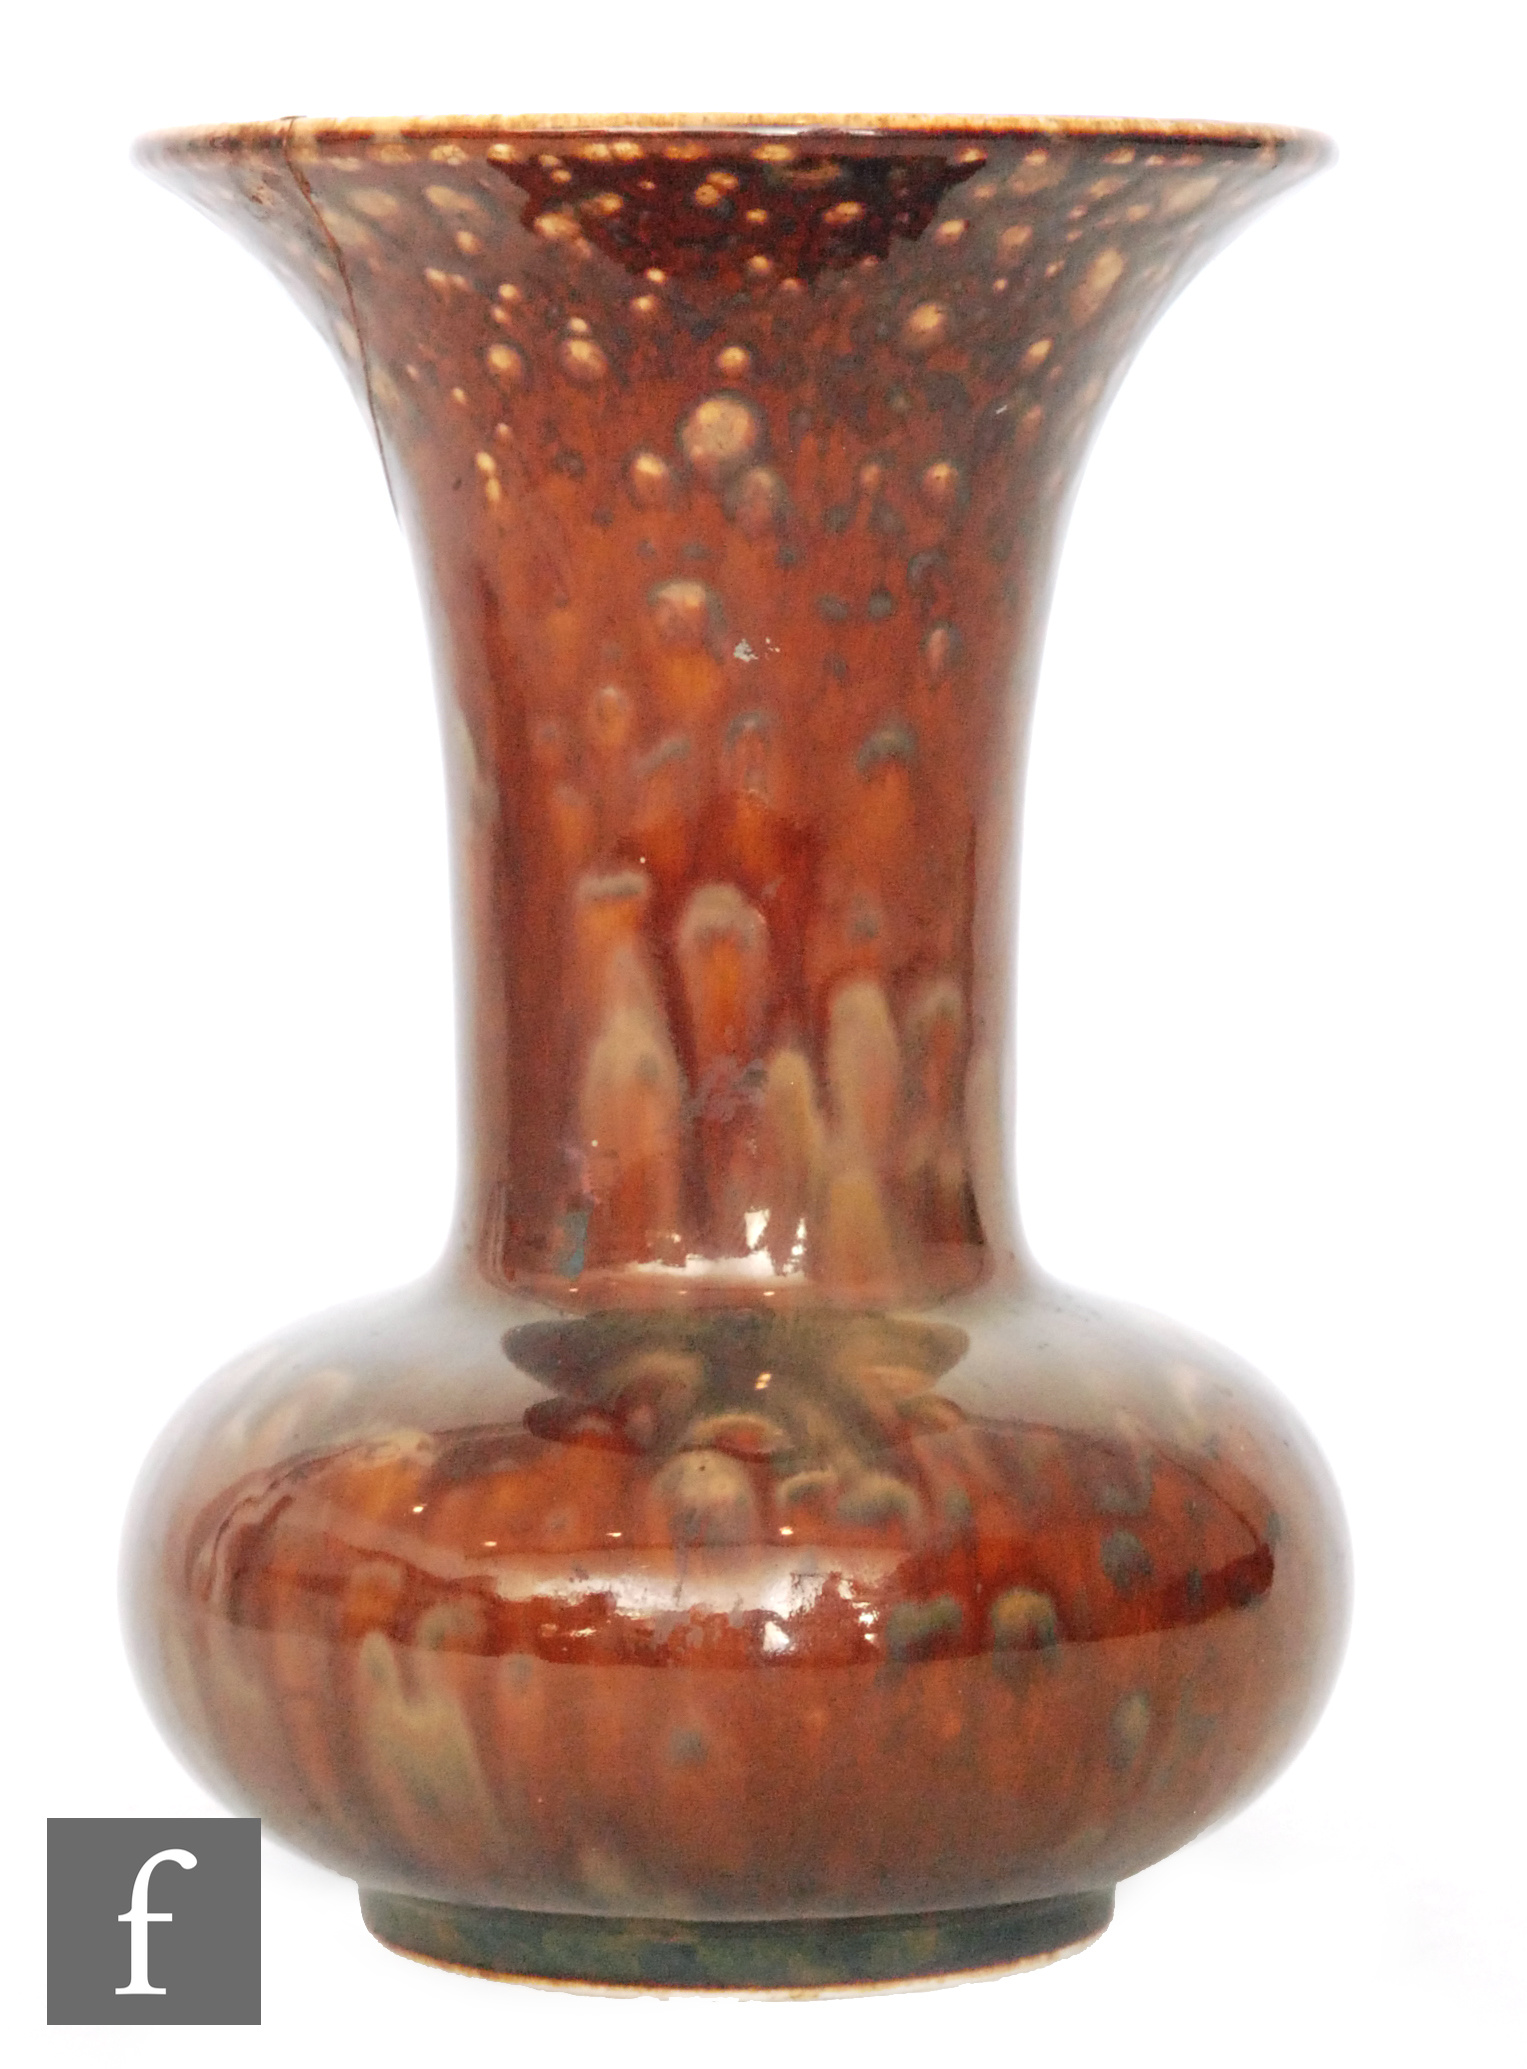 Ruskin Pottery - A souffle glaze vase of compressed form with a flared neck decorated in a mottled